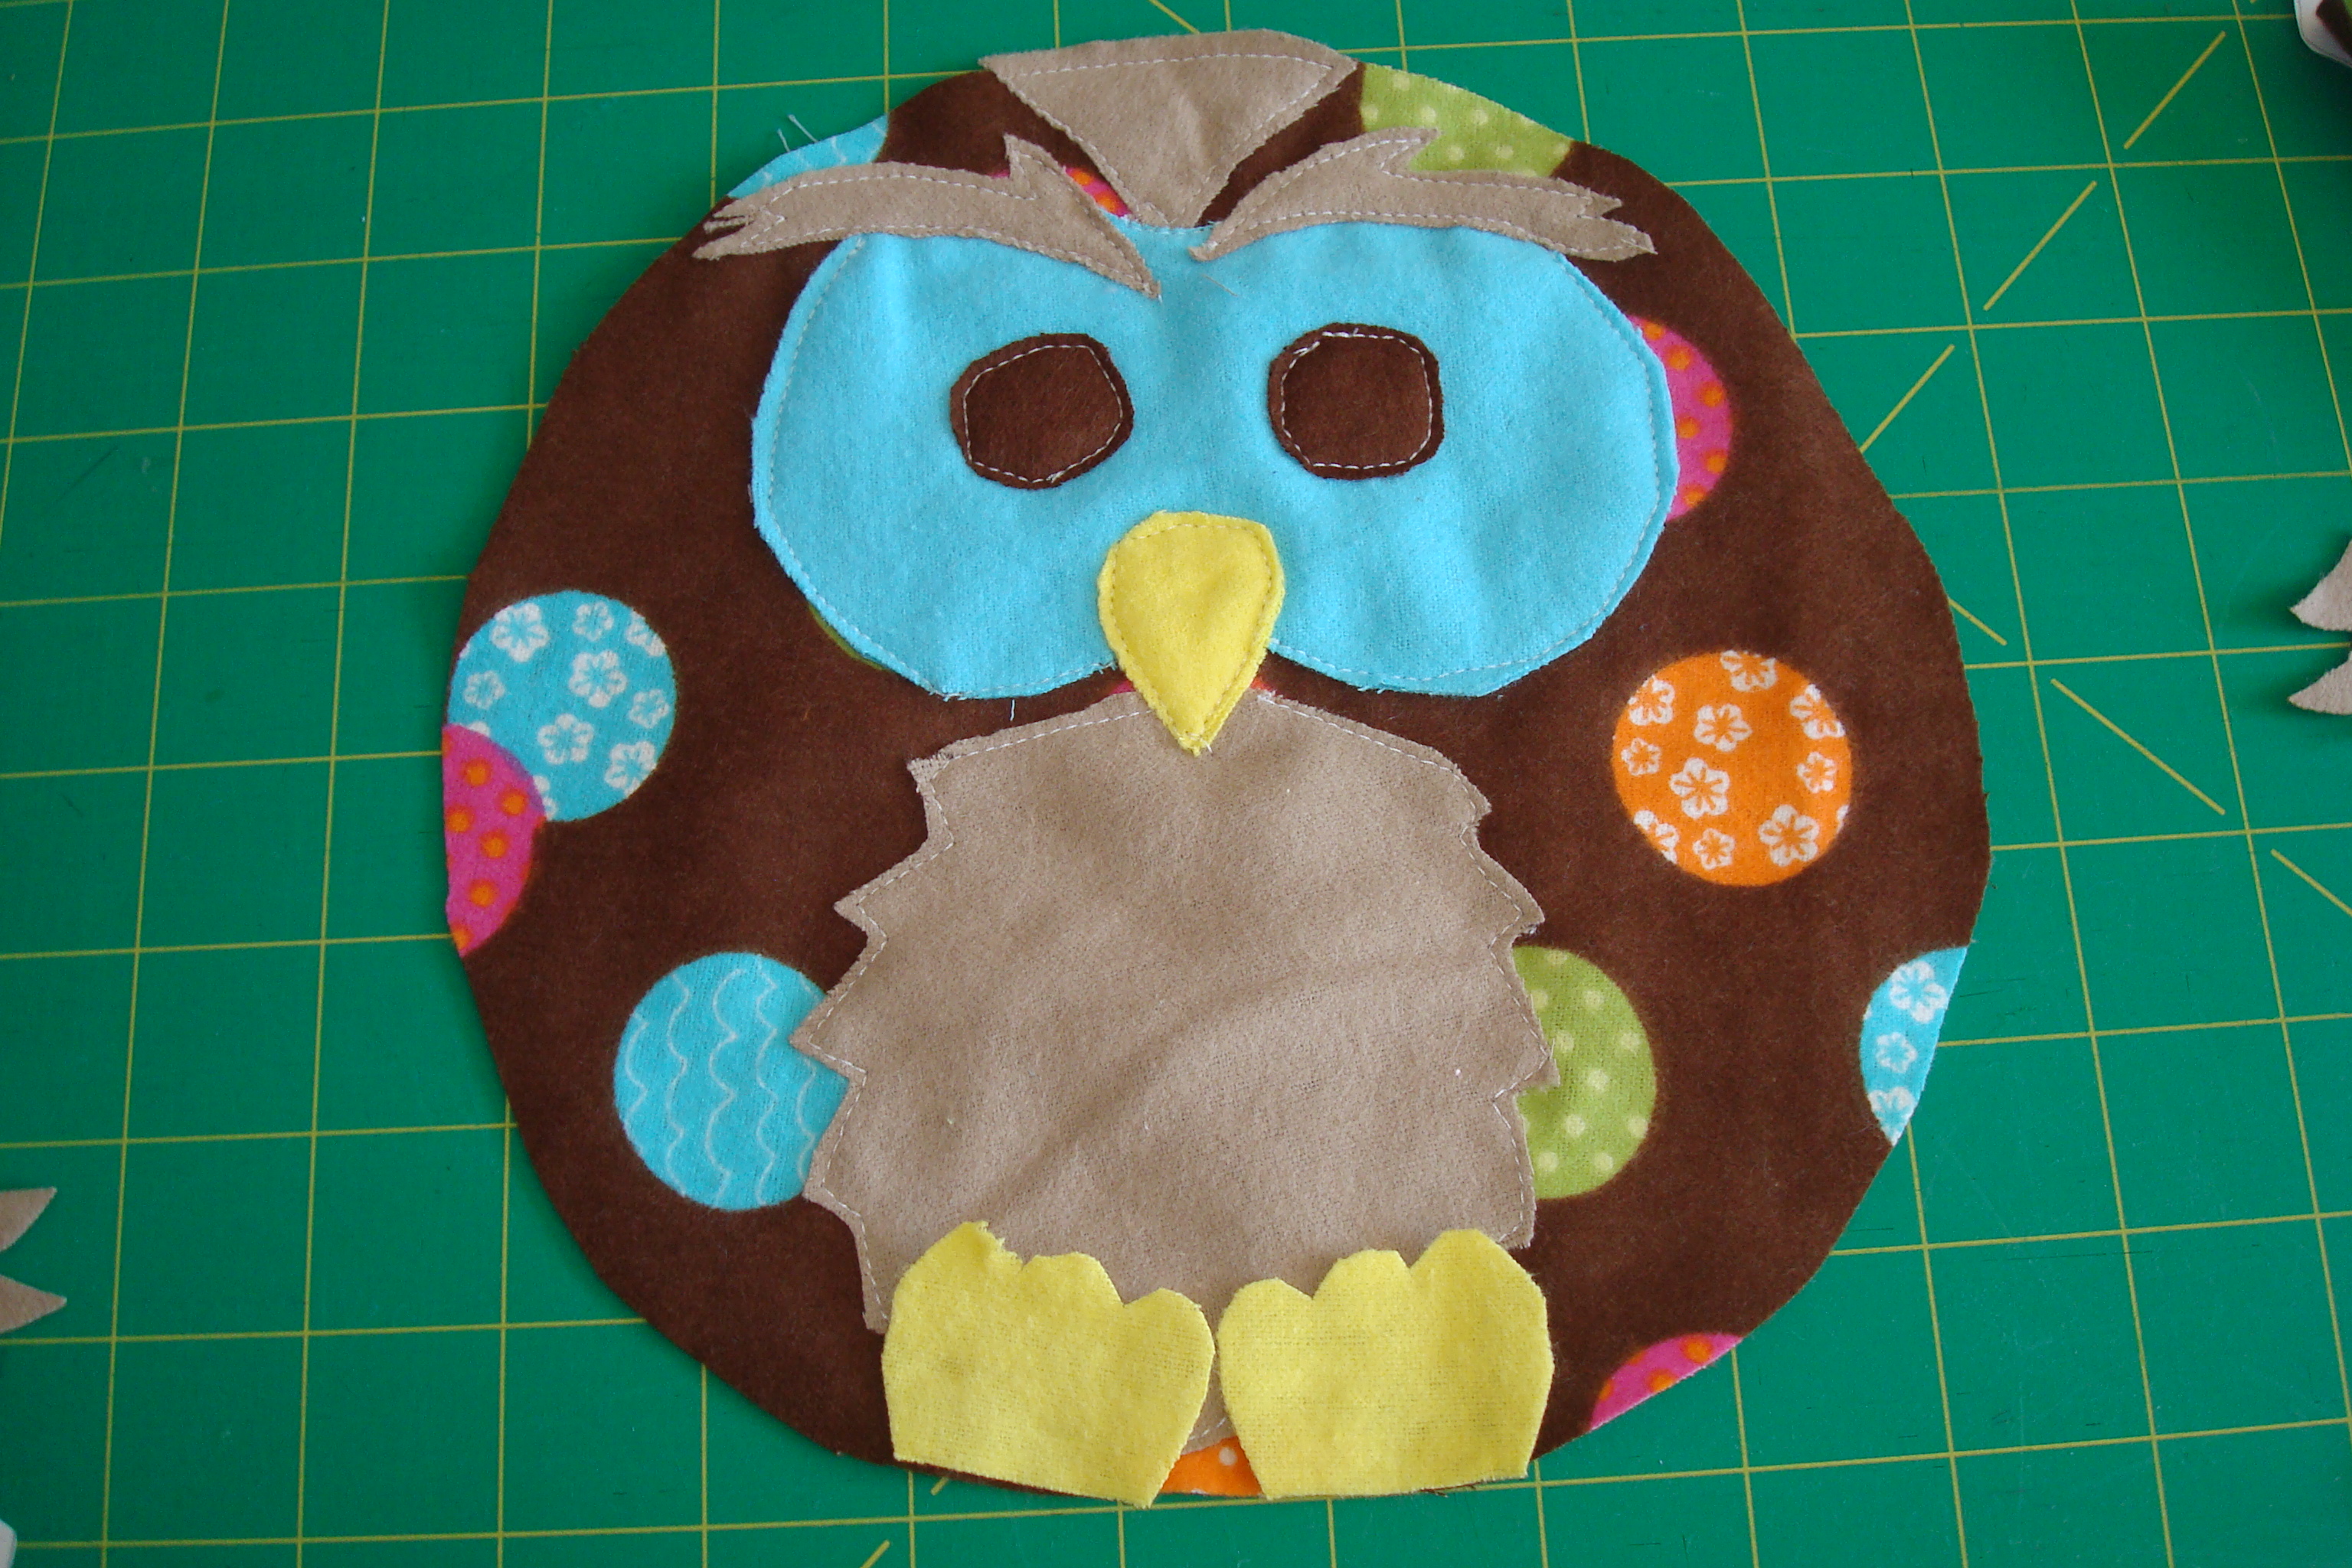 Sewn pieces to an owl toy